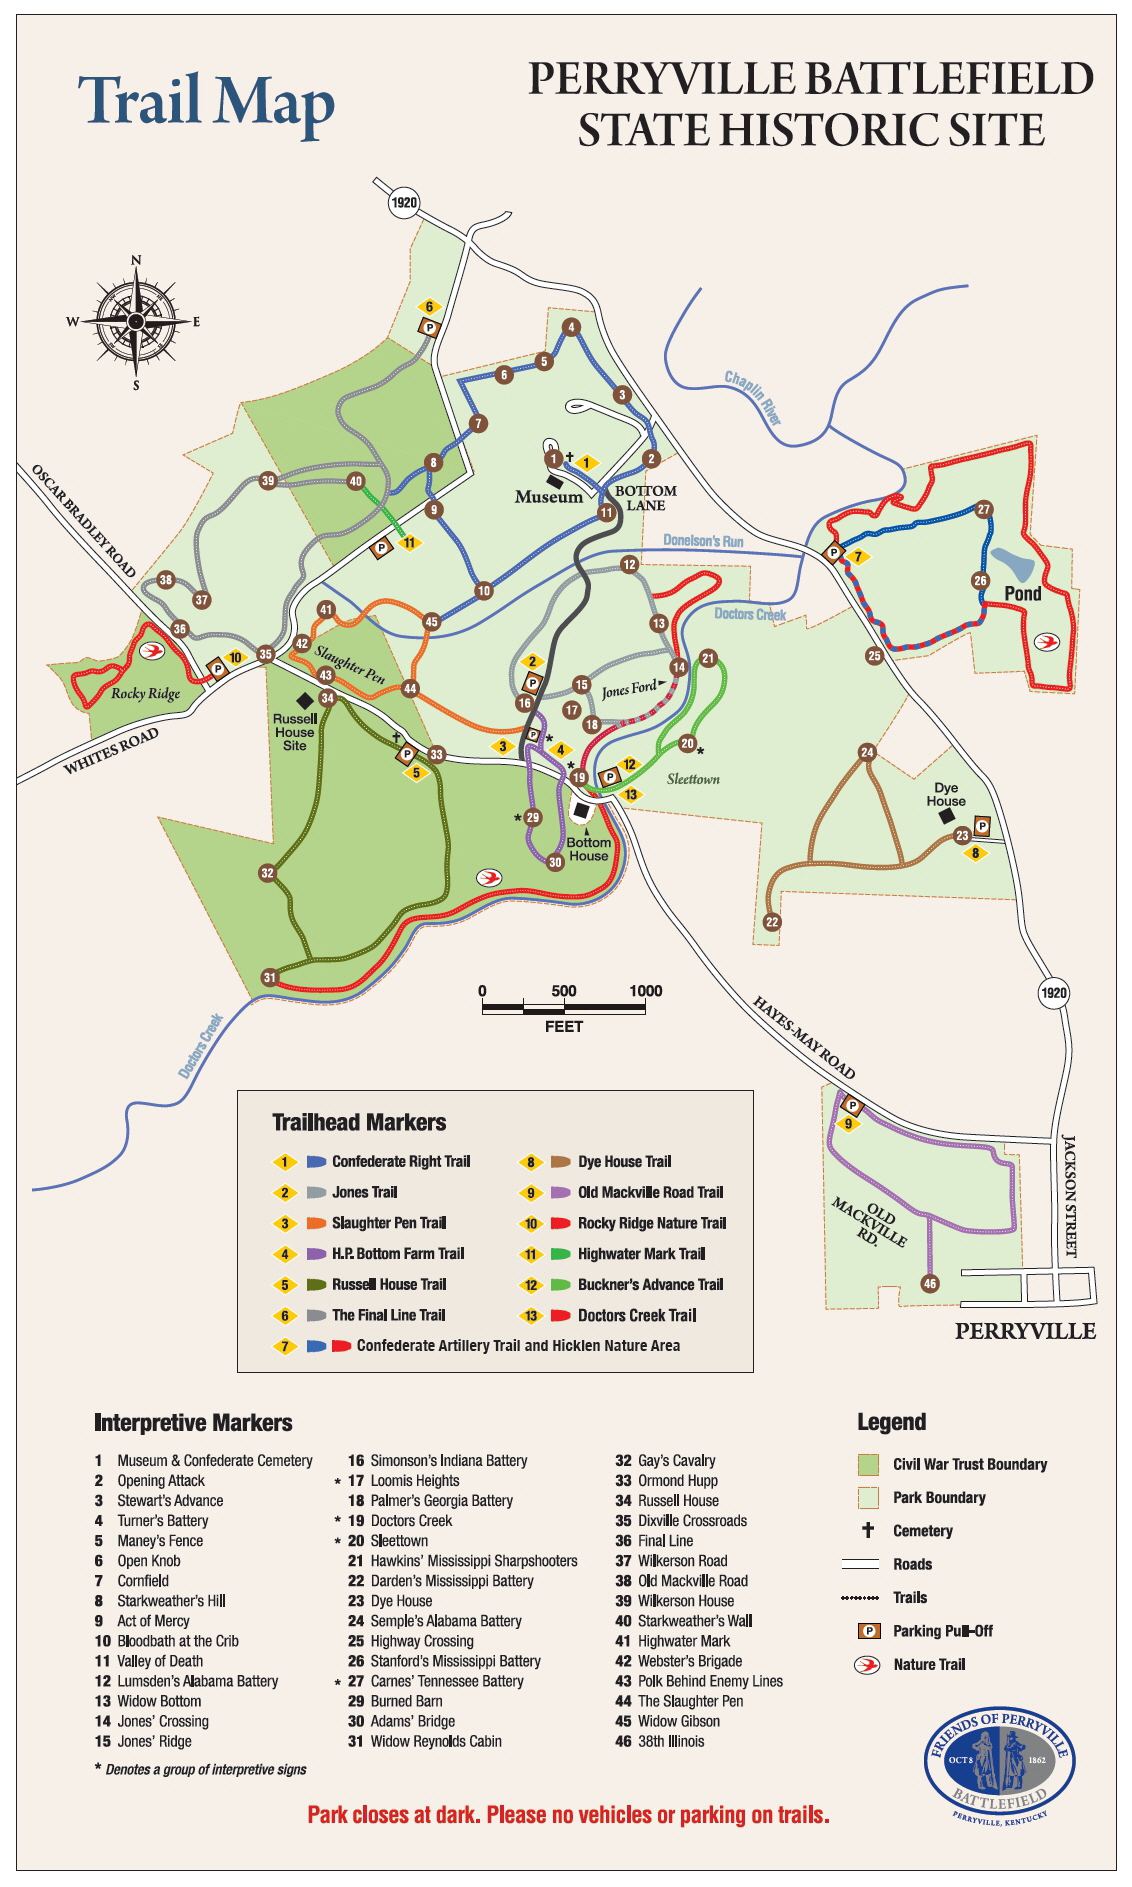 Trail Map front